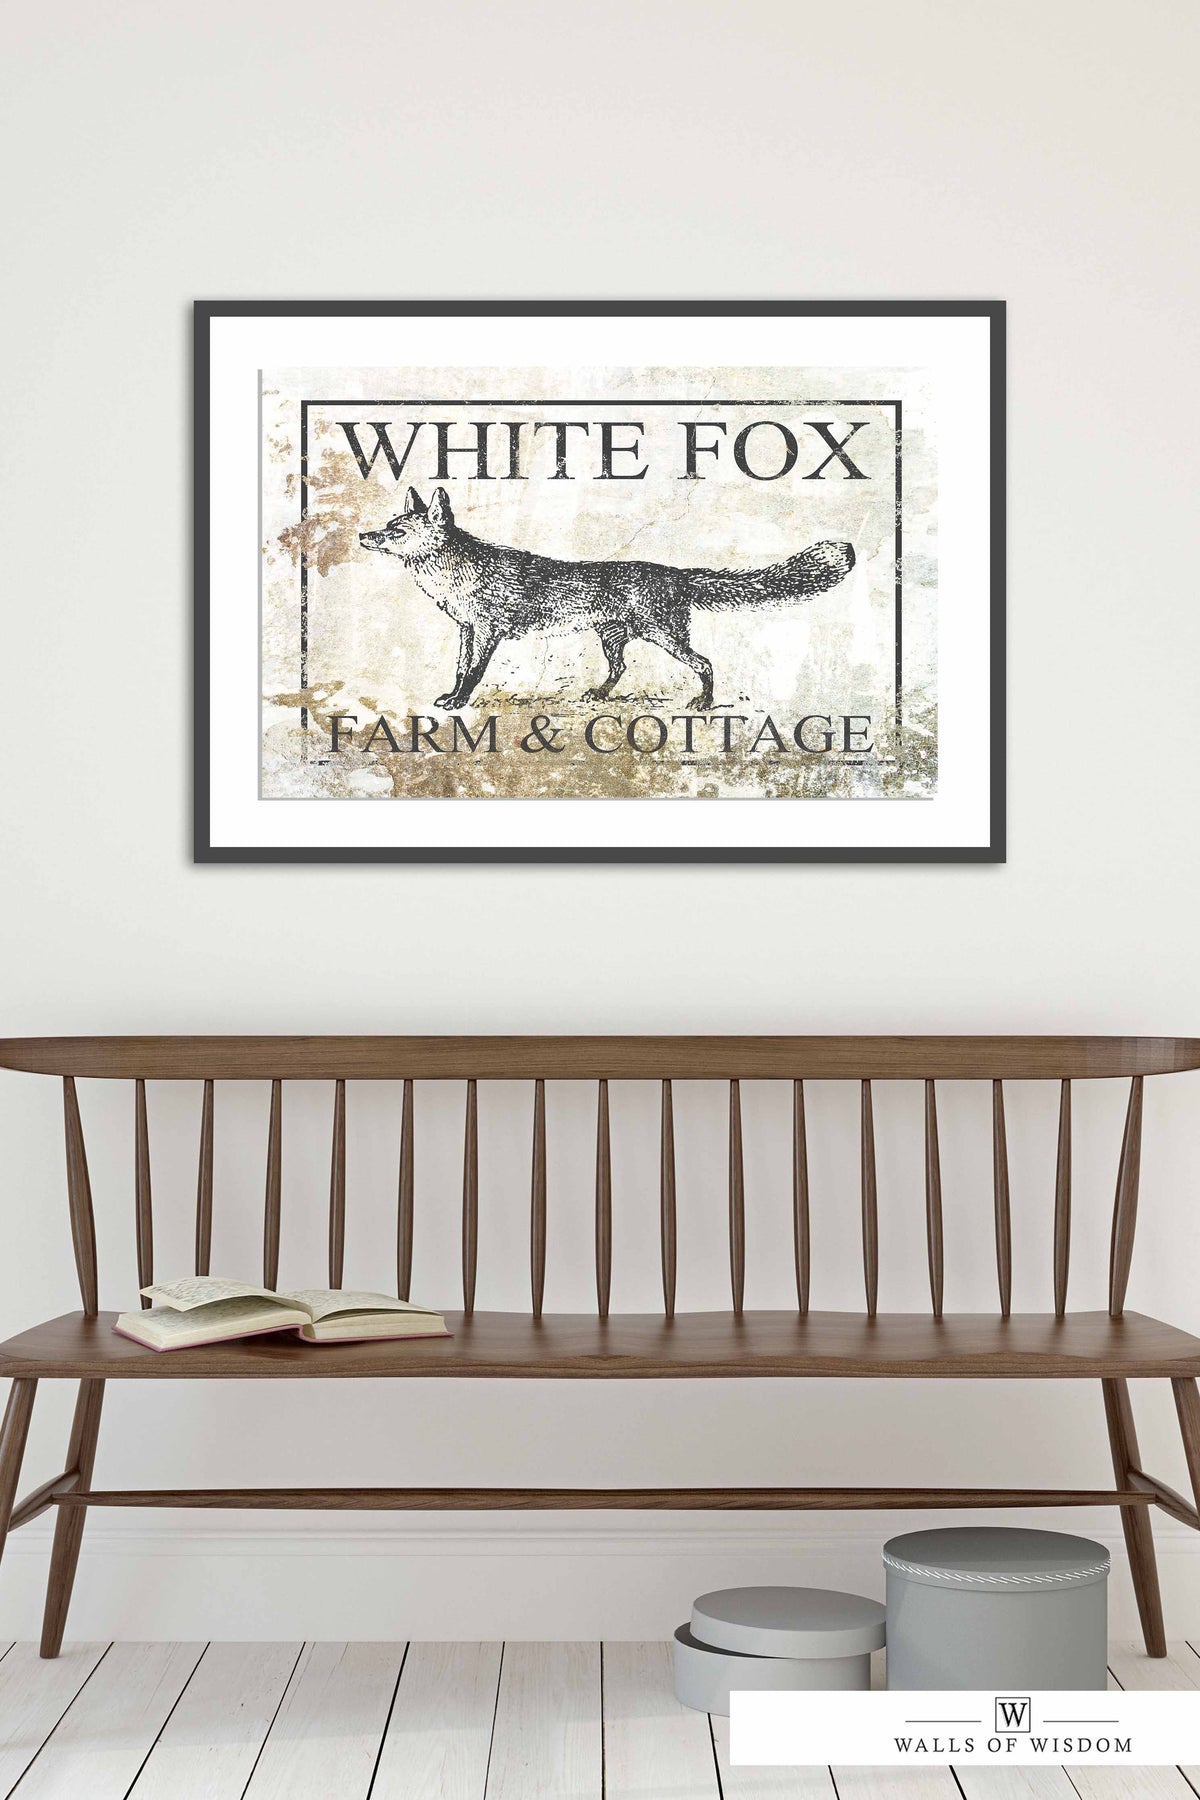 White Fox Farm and Cottage Vintage Poster Print - Rustic Cottage Style Sign